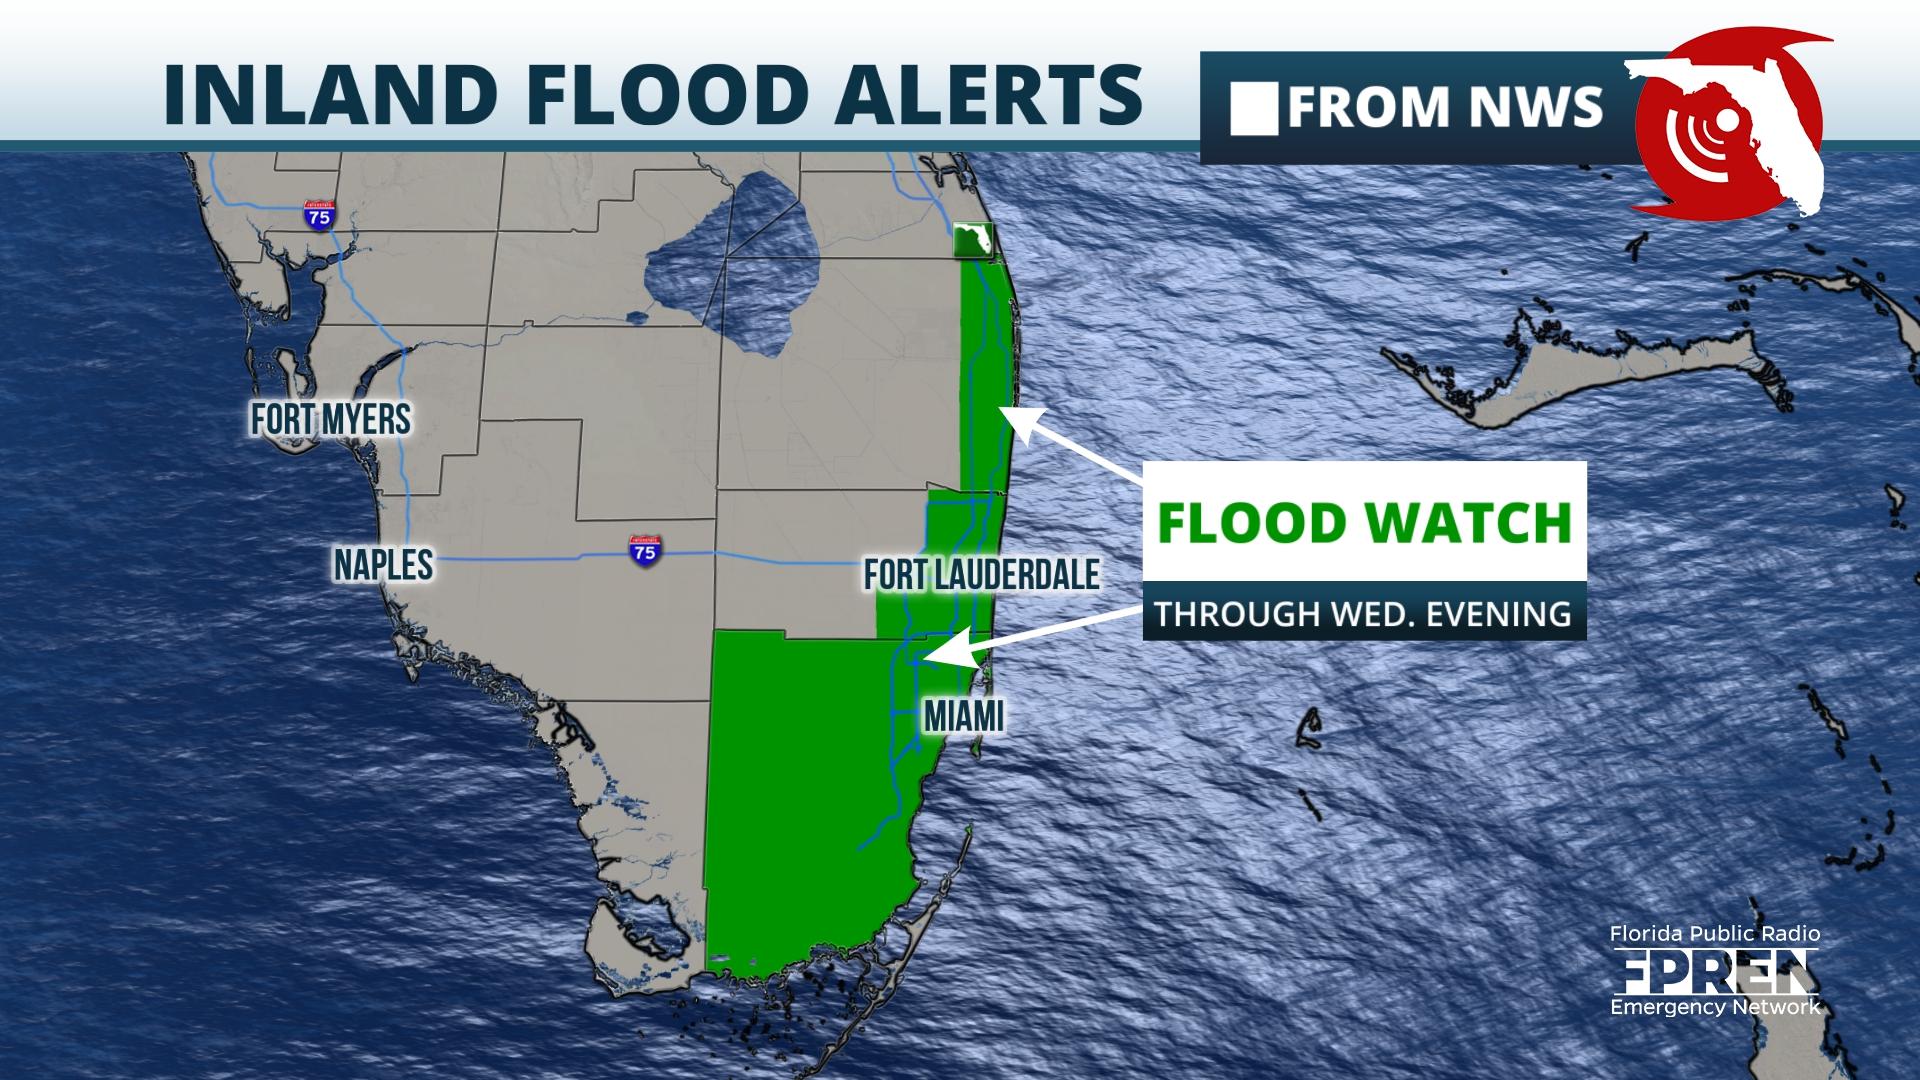 flood risk continues in portion of south florida through